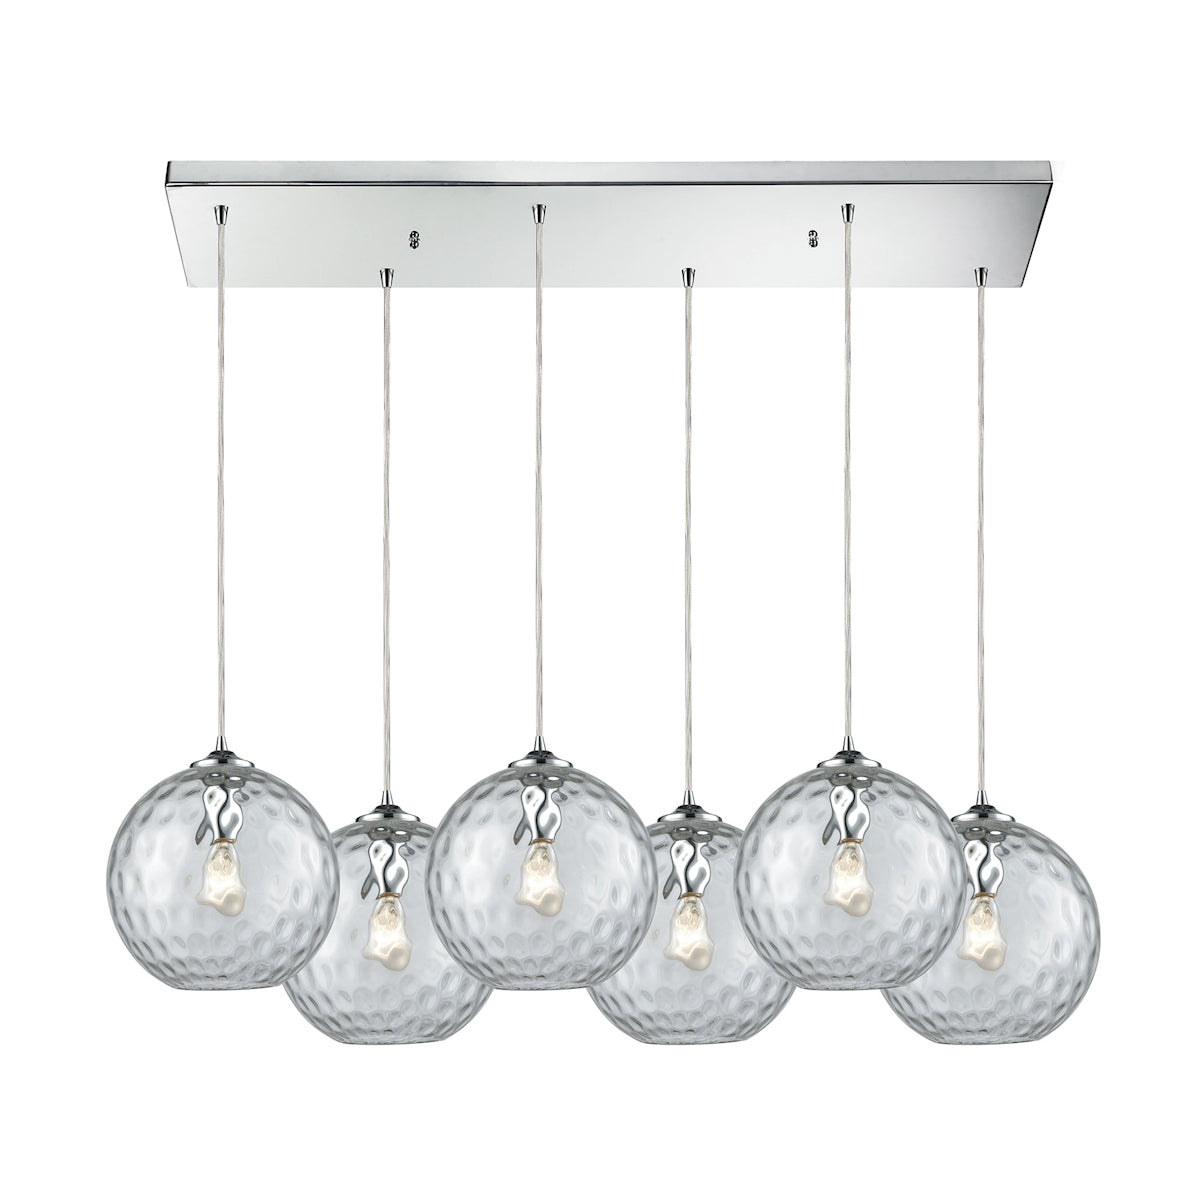 ELK Lighting 31380/6RC-CLR Watersphere 6-Light Rectangular Pendant Fixture in Chrome with Hammered Clear Glass